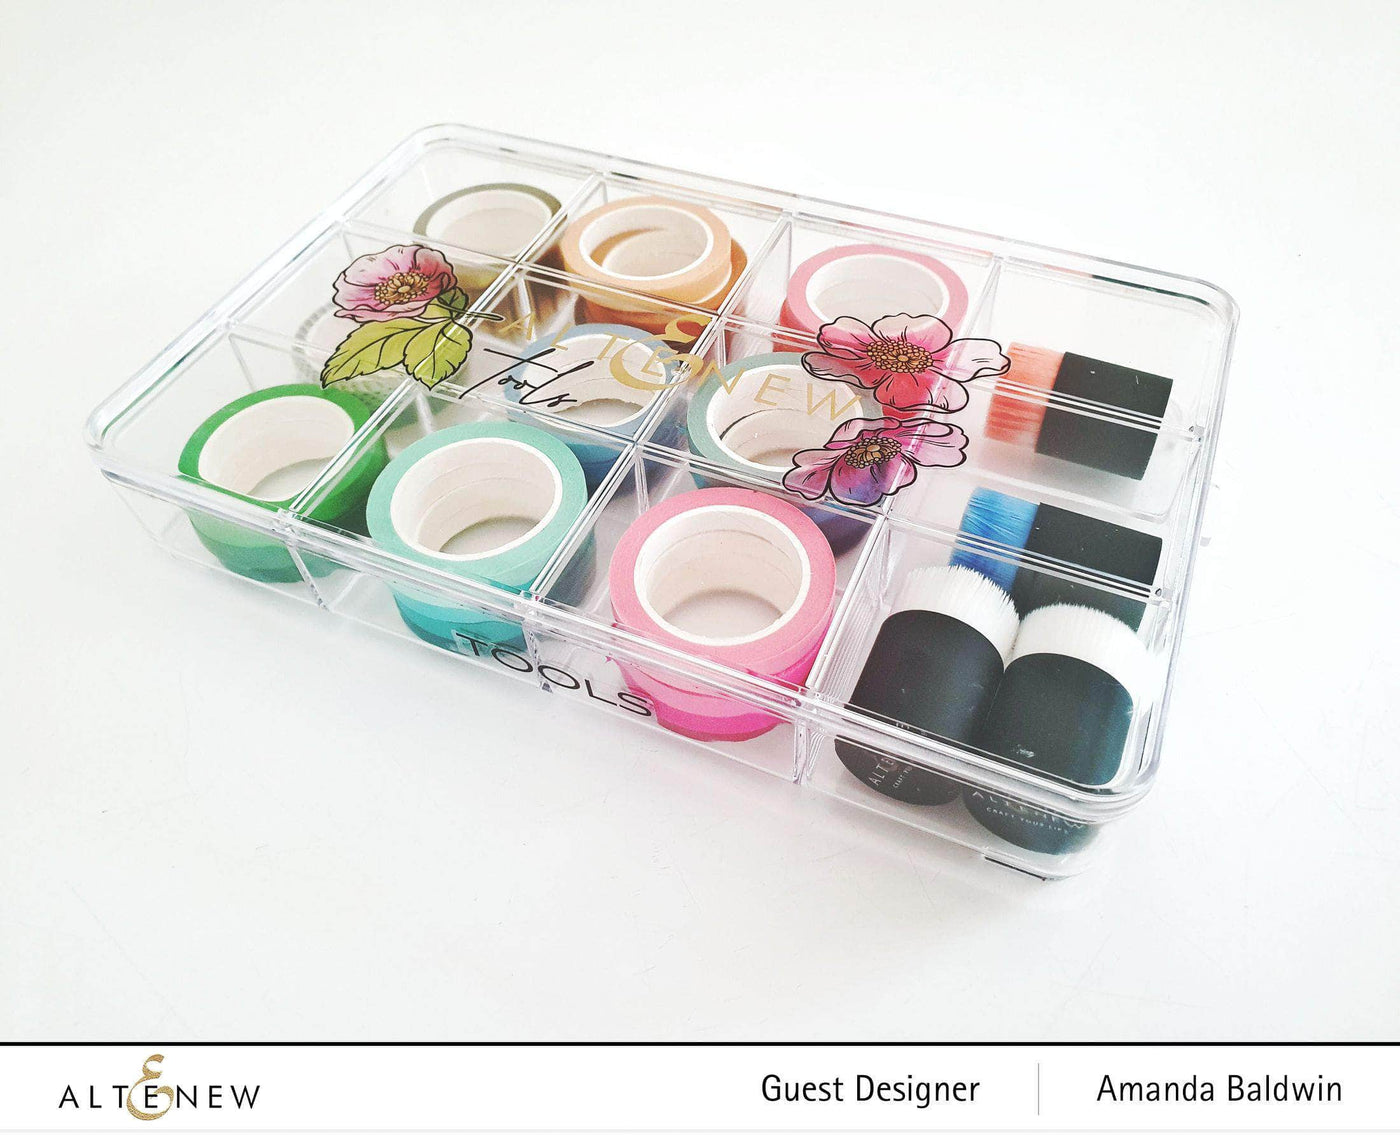 Tools Crafters Showcase: Small Ink Blending Tool Stackable Storage